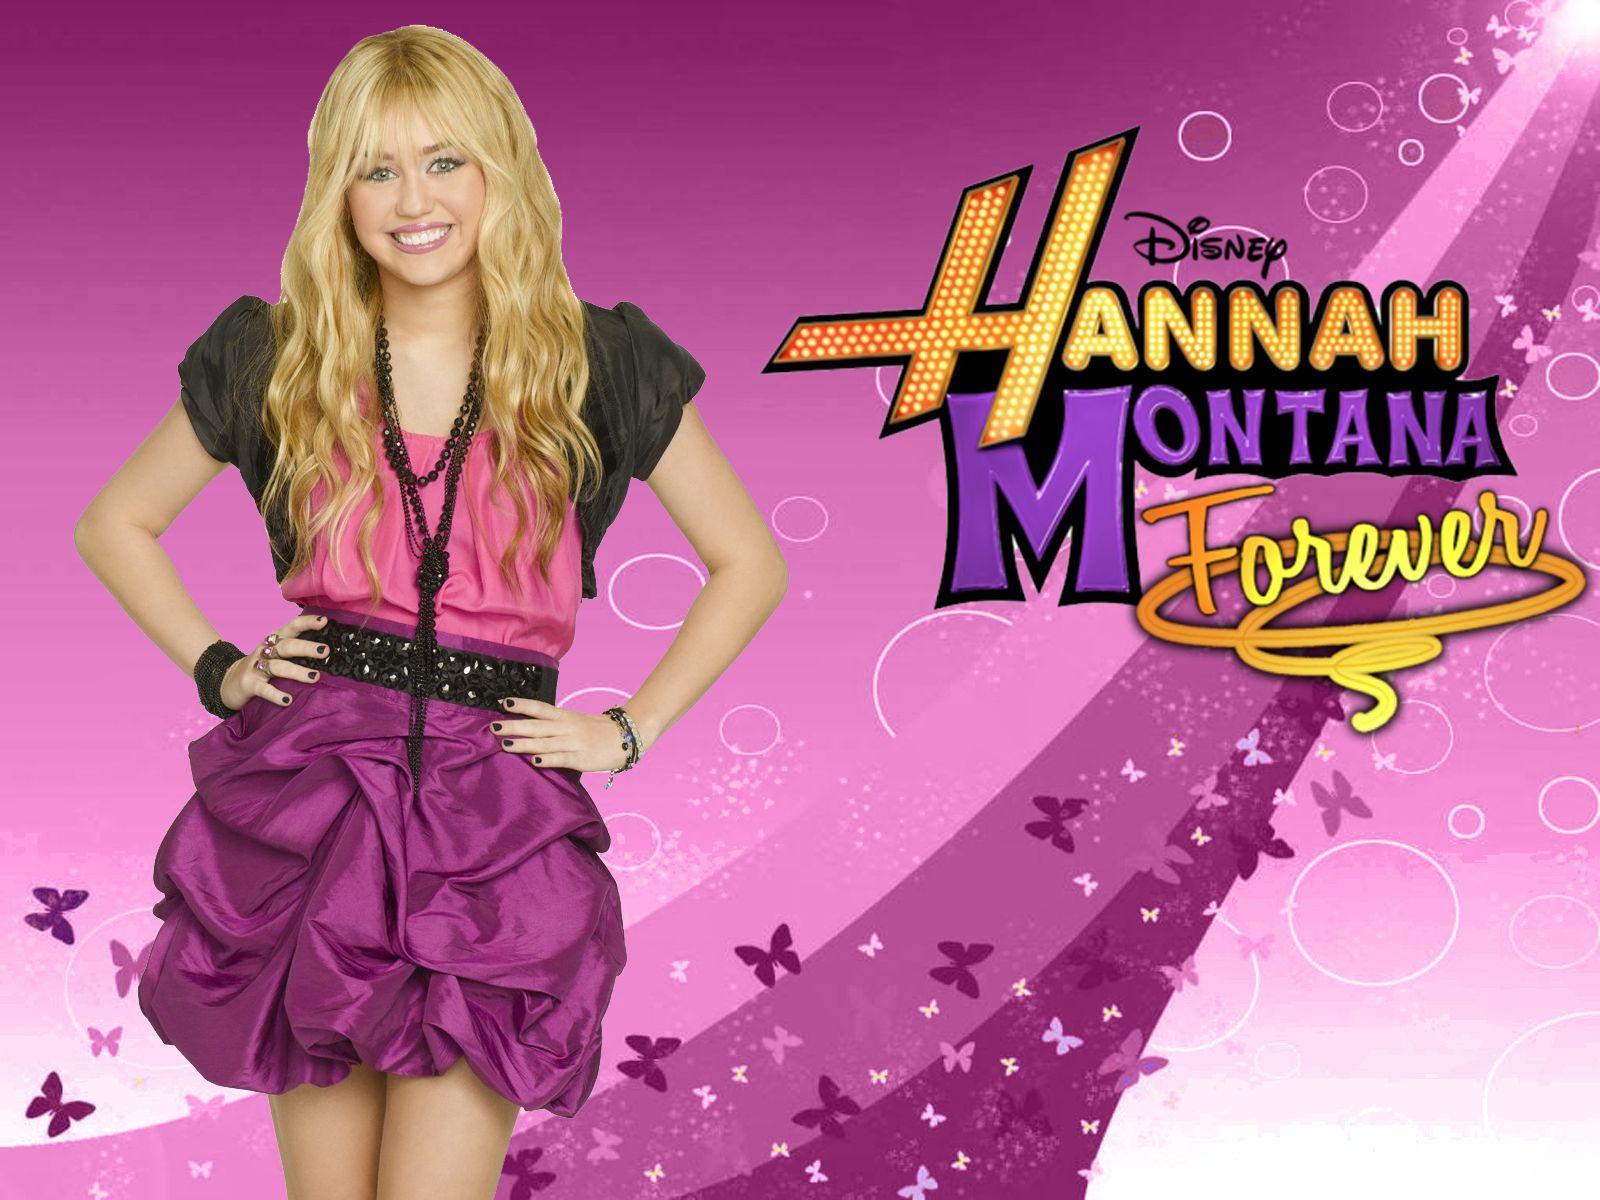 Miley Cyrus in Hannah Montana Wallpapers  HD Wallpapers  ID 7798